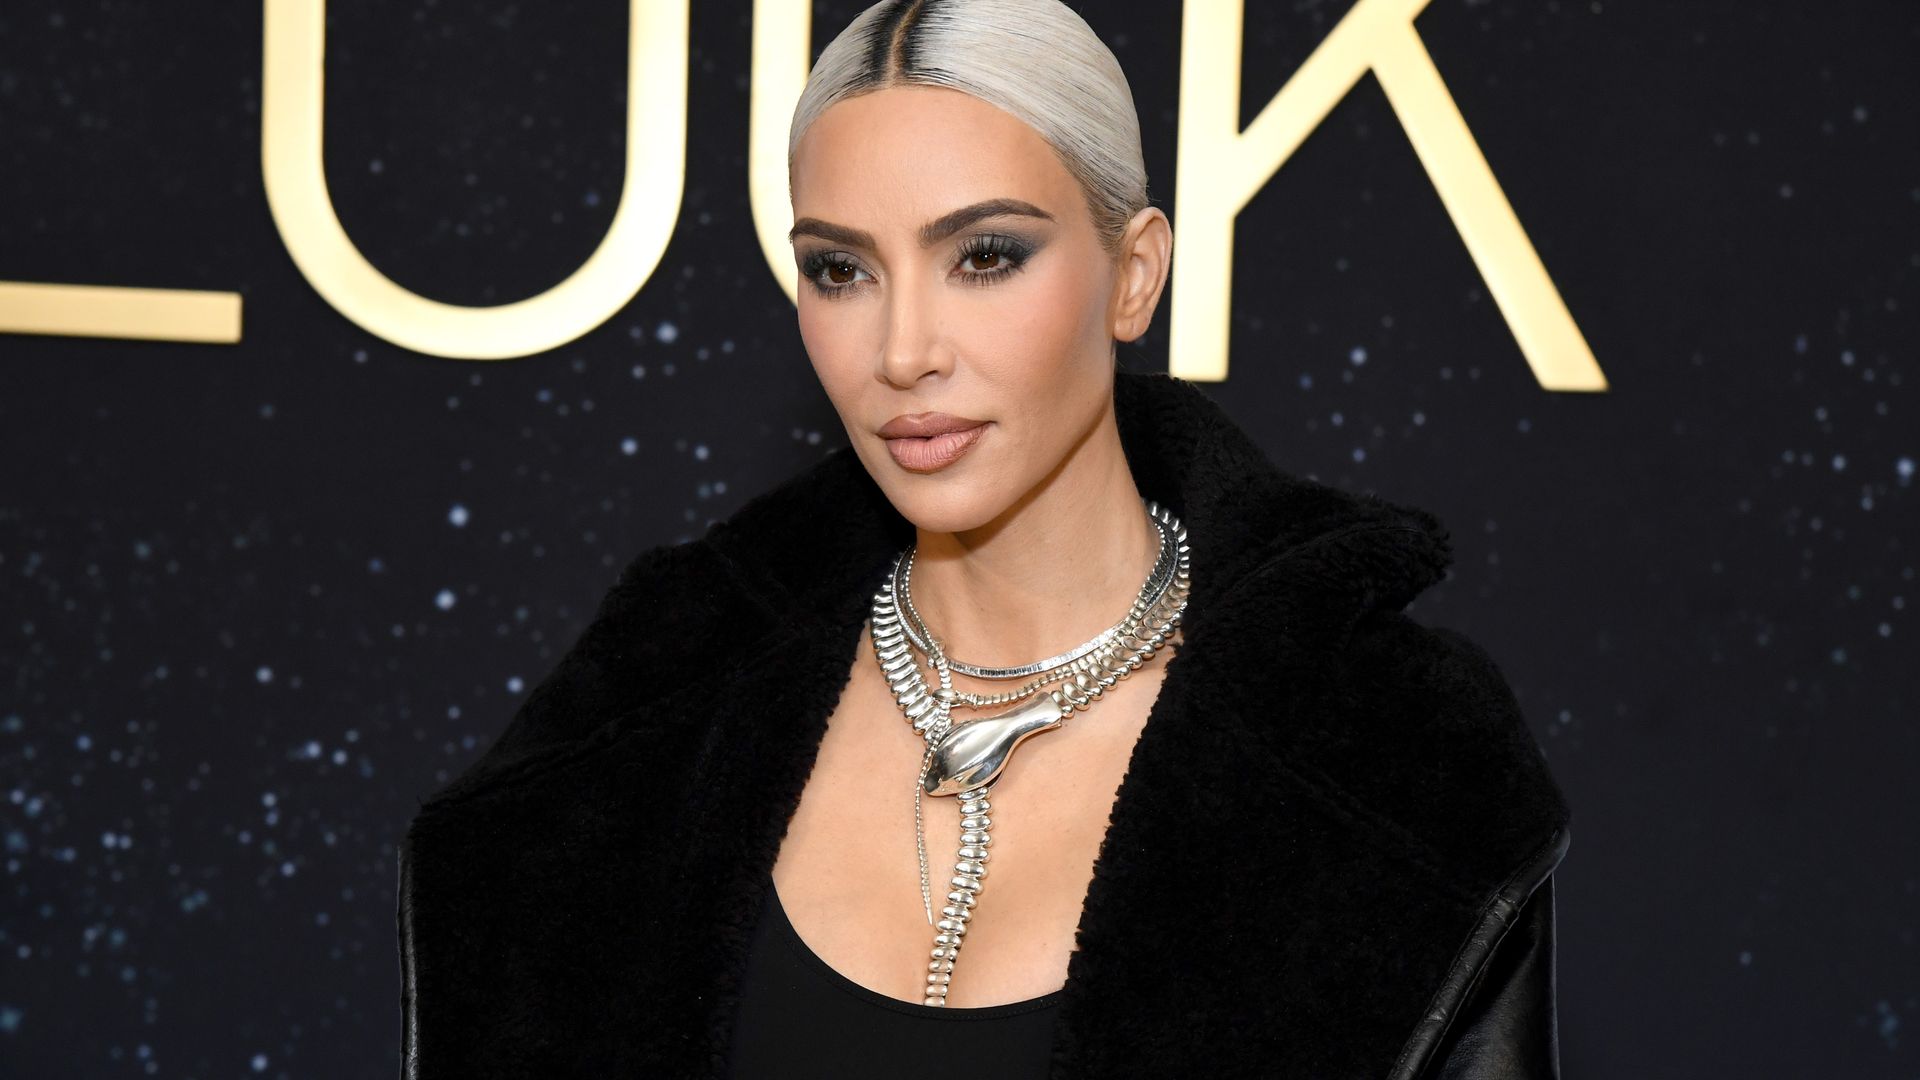 Kim Kardashian skips out on her family’s holiday video - and fans think they know why